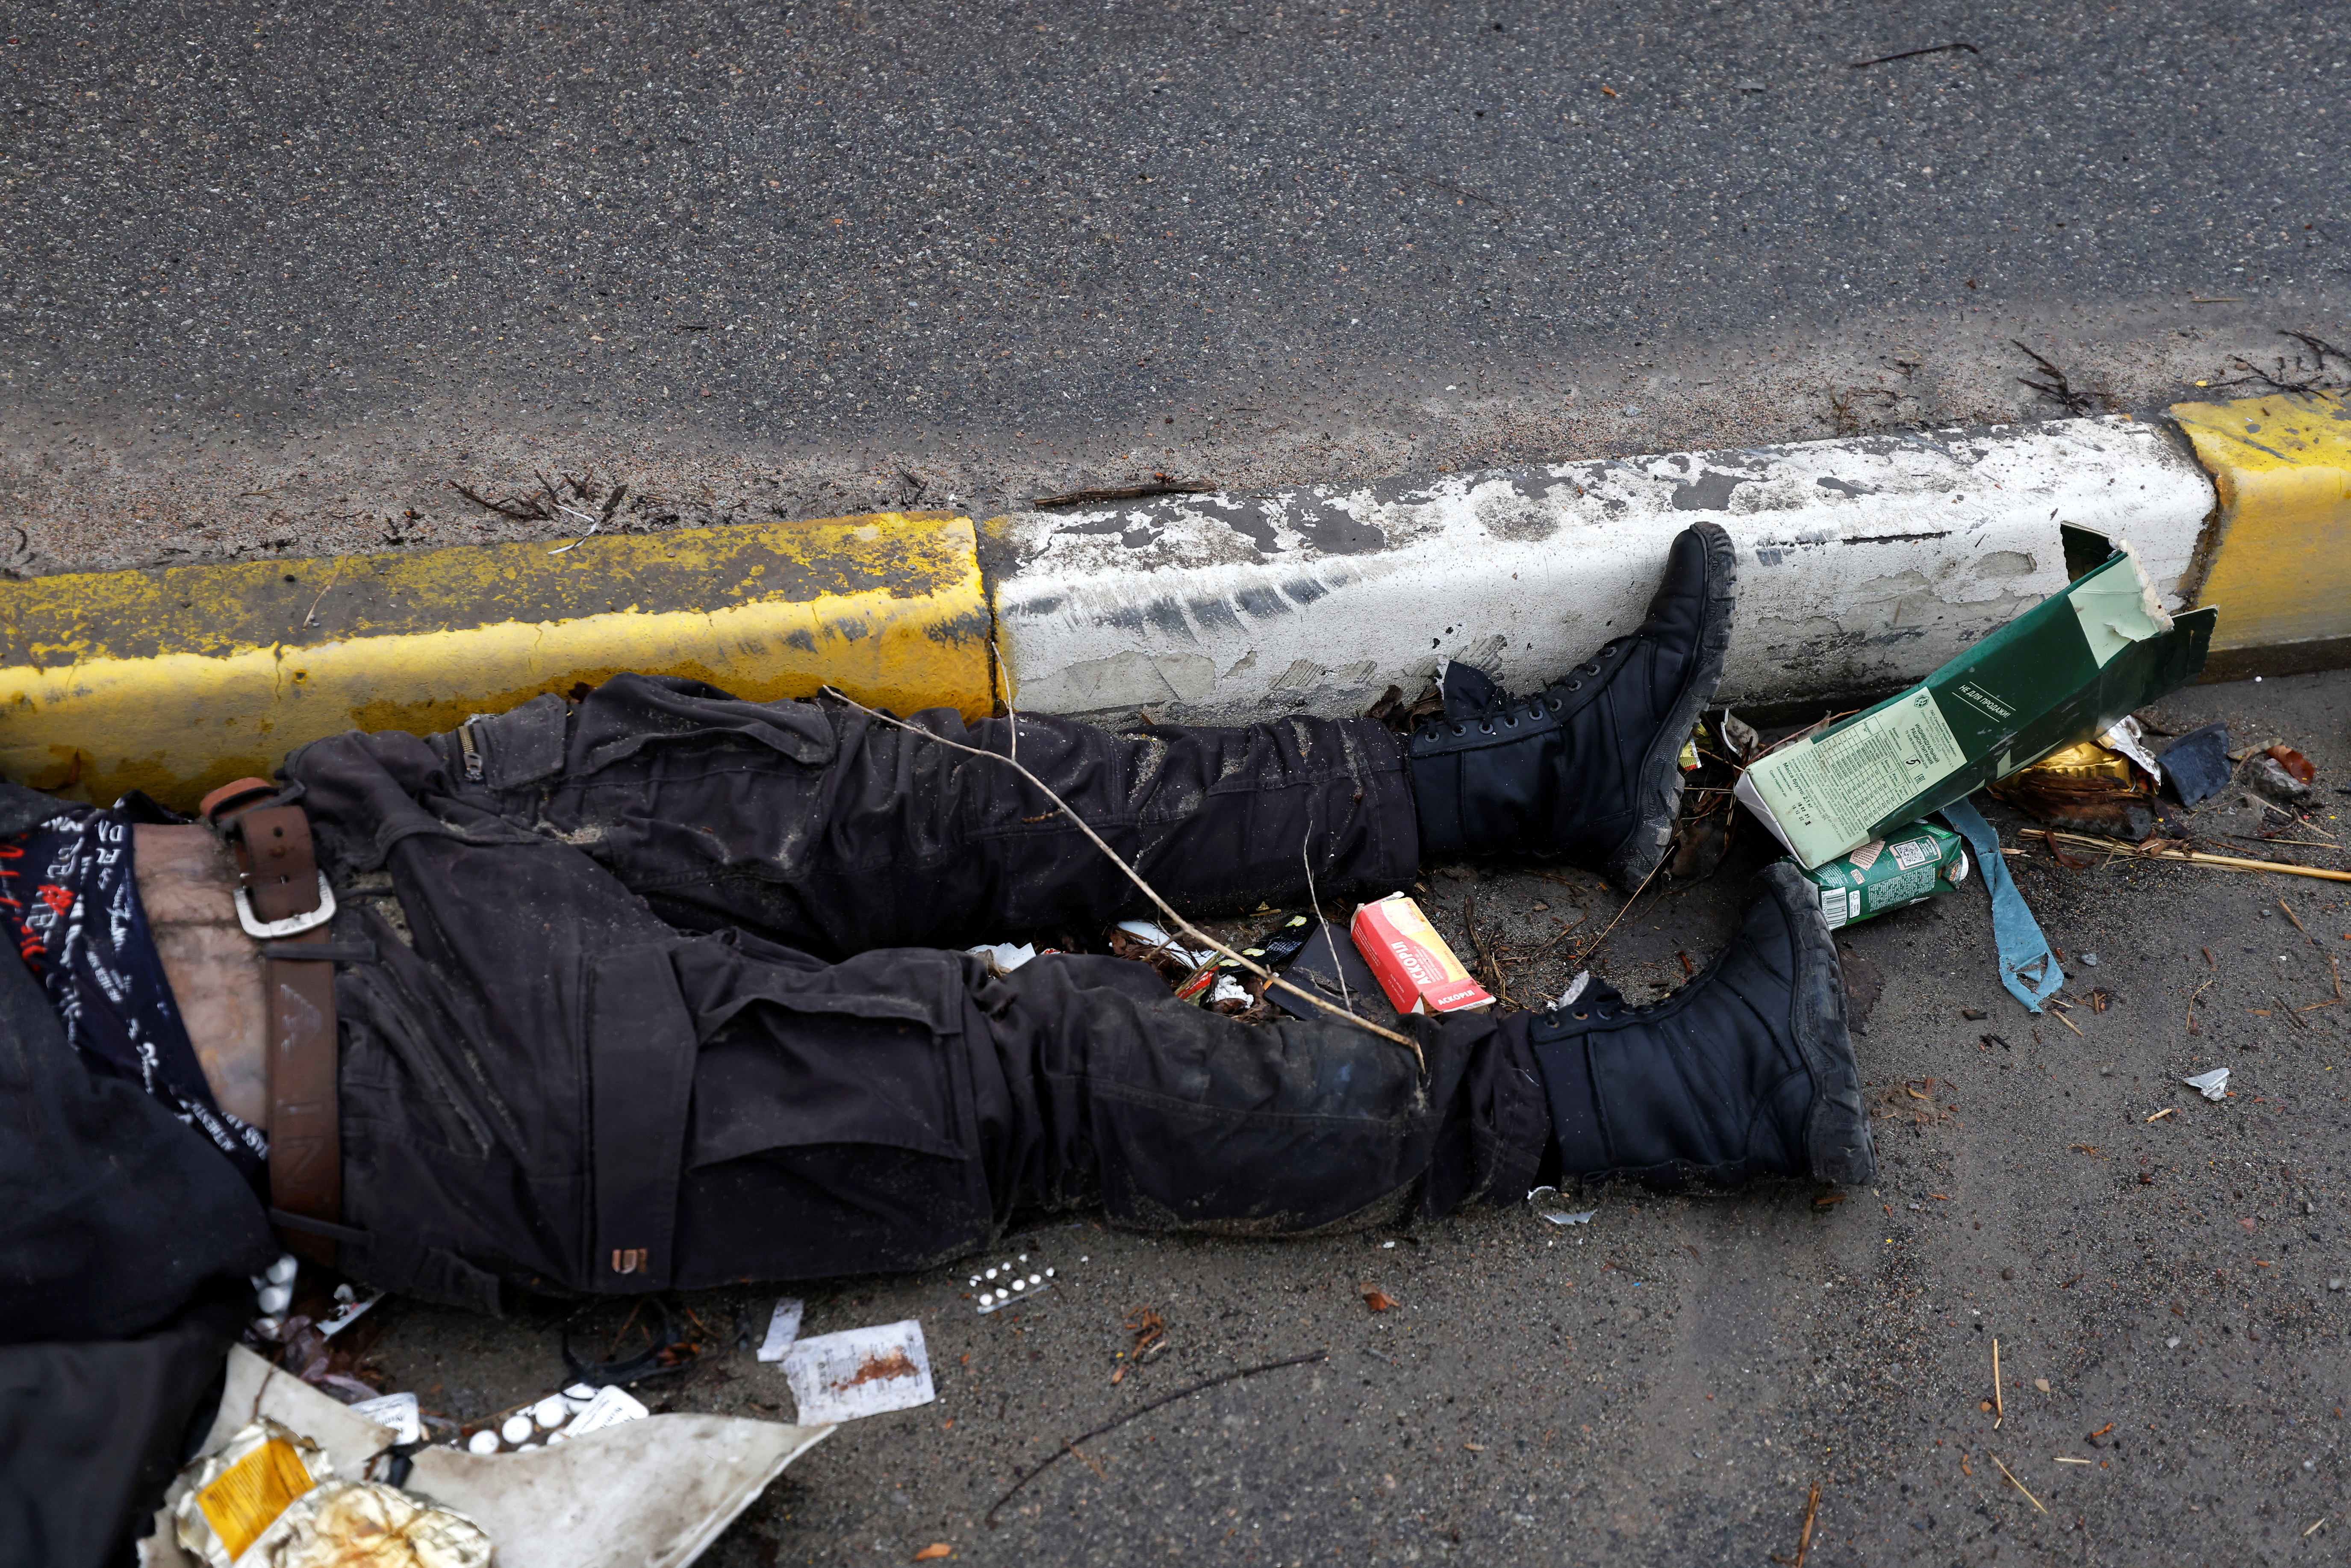 SENSITIVE MATERIAL. THIS IMAGE MAY OFFEND OR DISTURB    A body of a civilian, who according to residents was killed by Russian army soldiers, lies on the street, amid Russia's invasion of Ukraine, in Bucha, in Kyiv region, Ukraine April 2, 2022. REUTERS/Zohra Bensemra